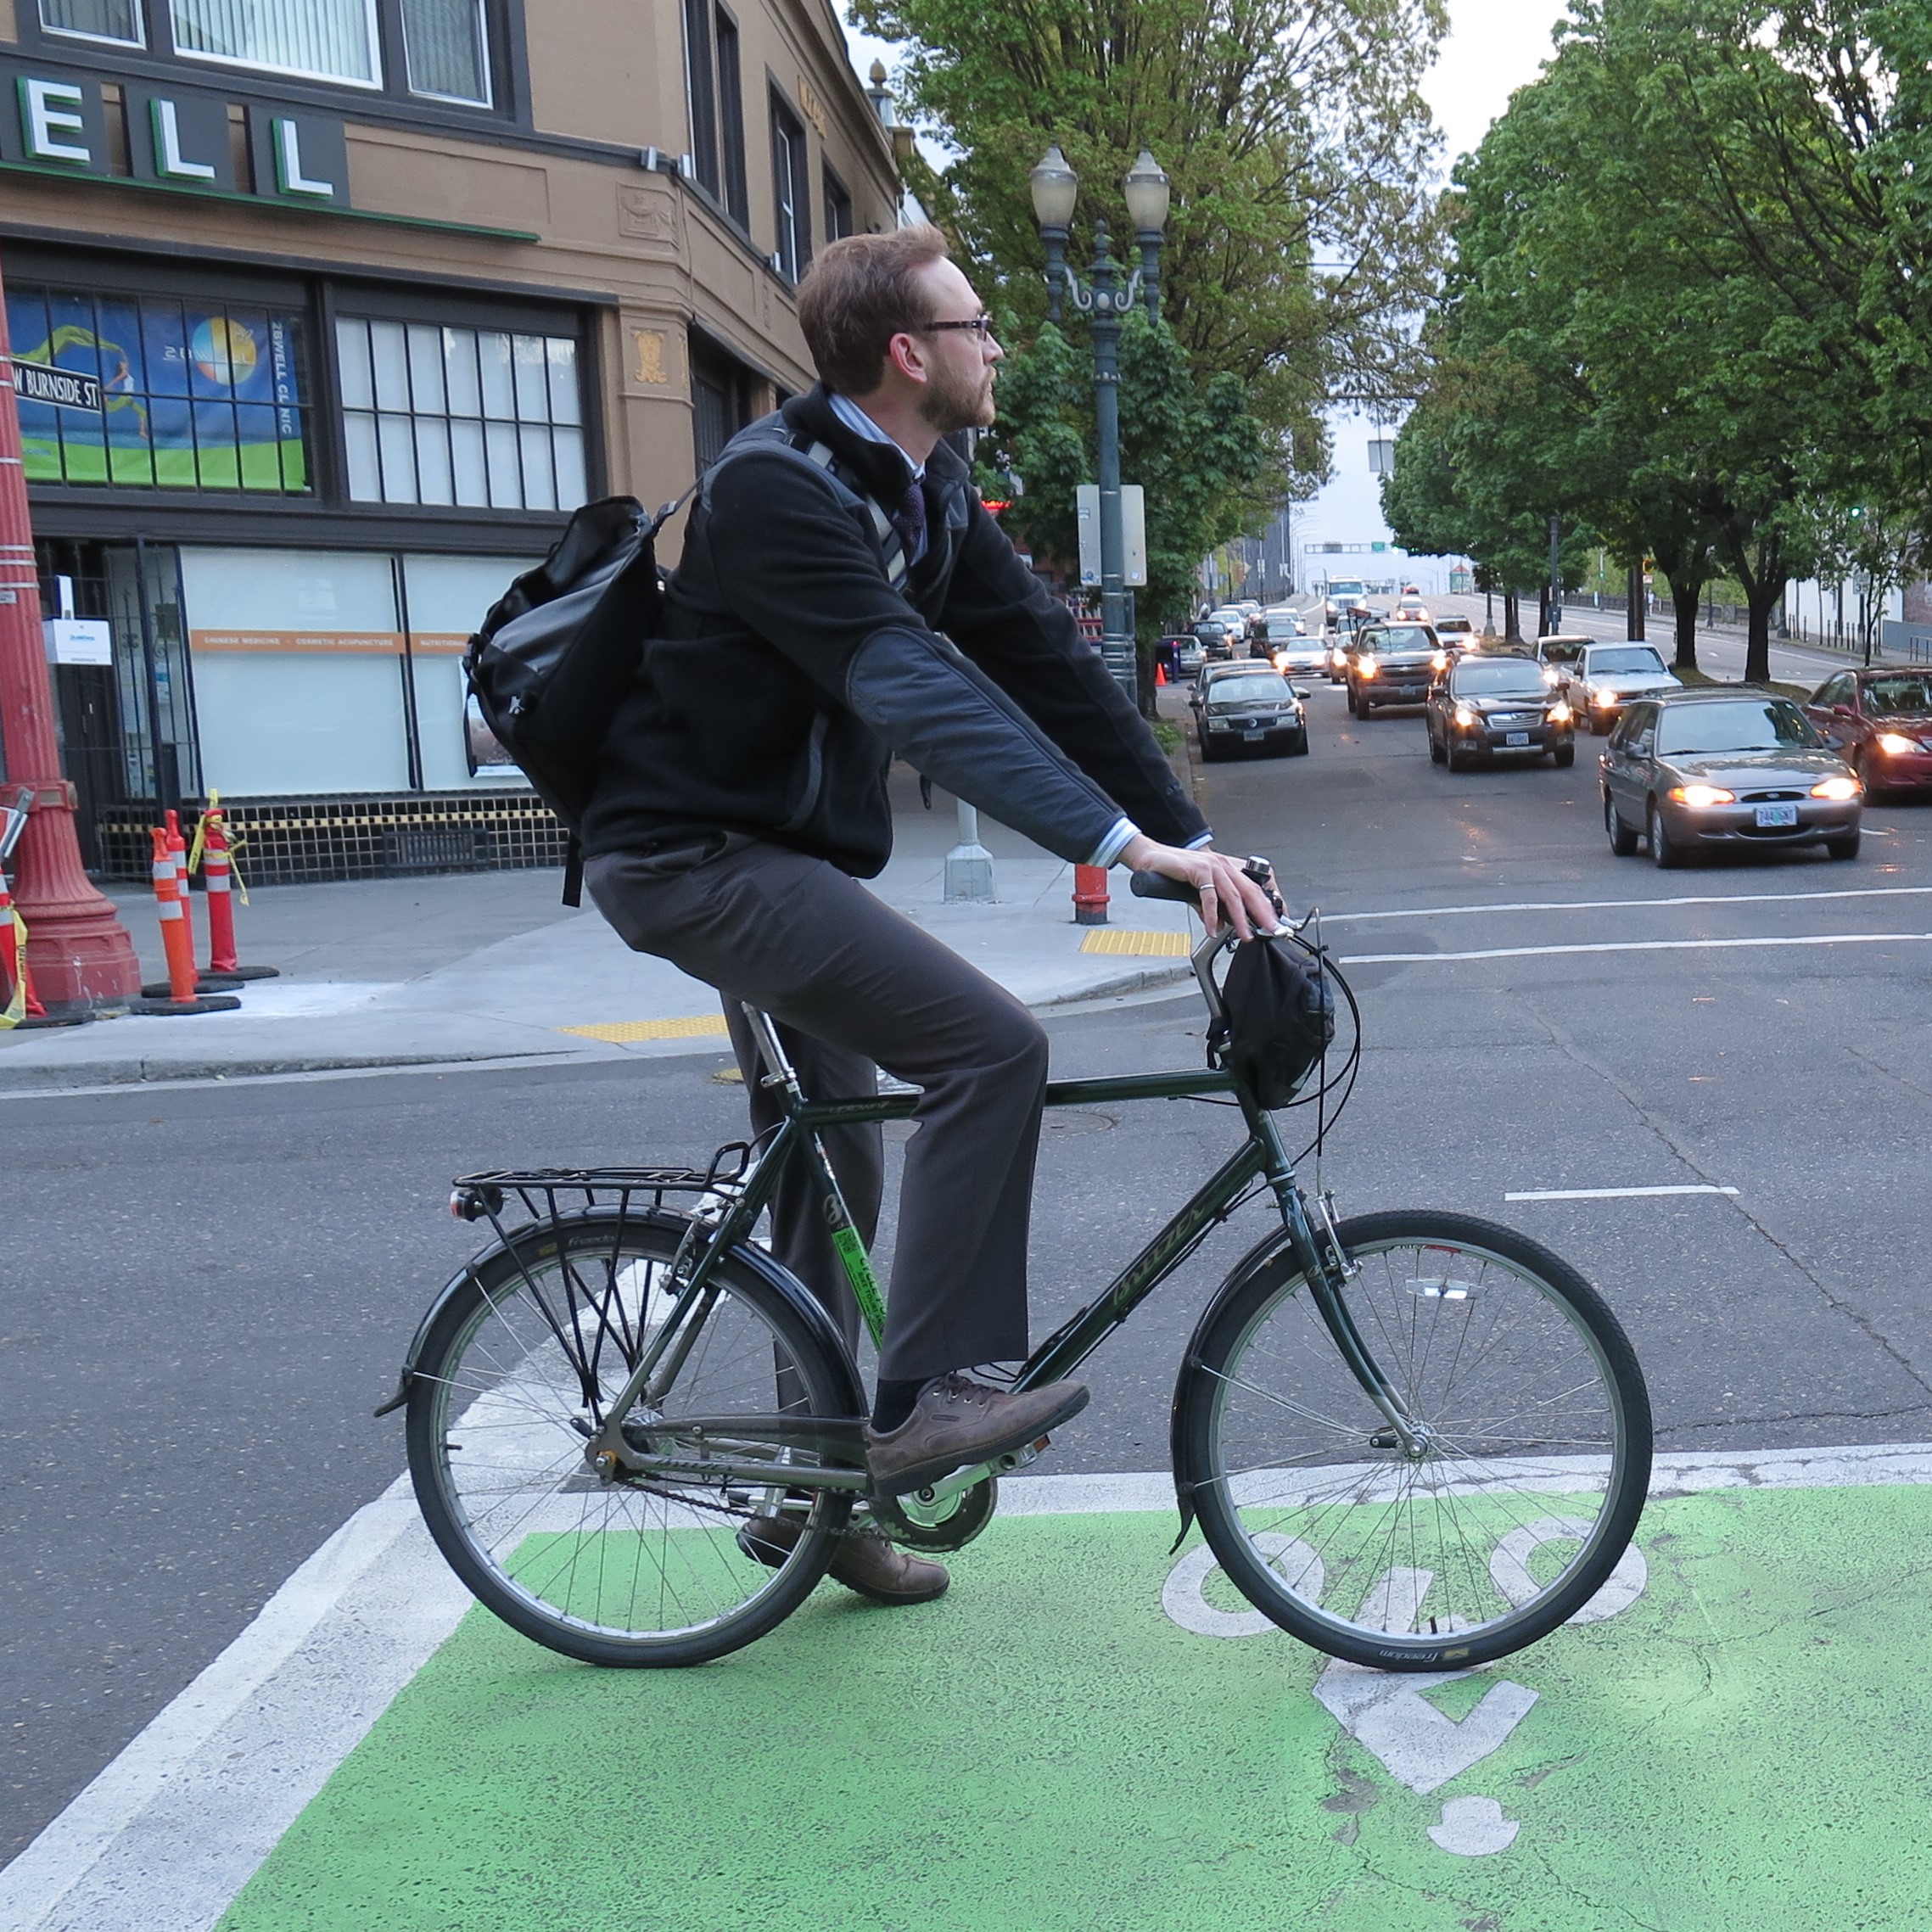 Jeremy Chrzan waits in a two-stage turn box at a stoplight while riding his bike.